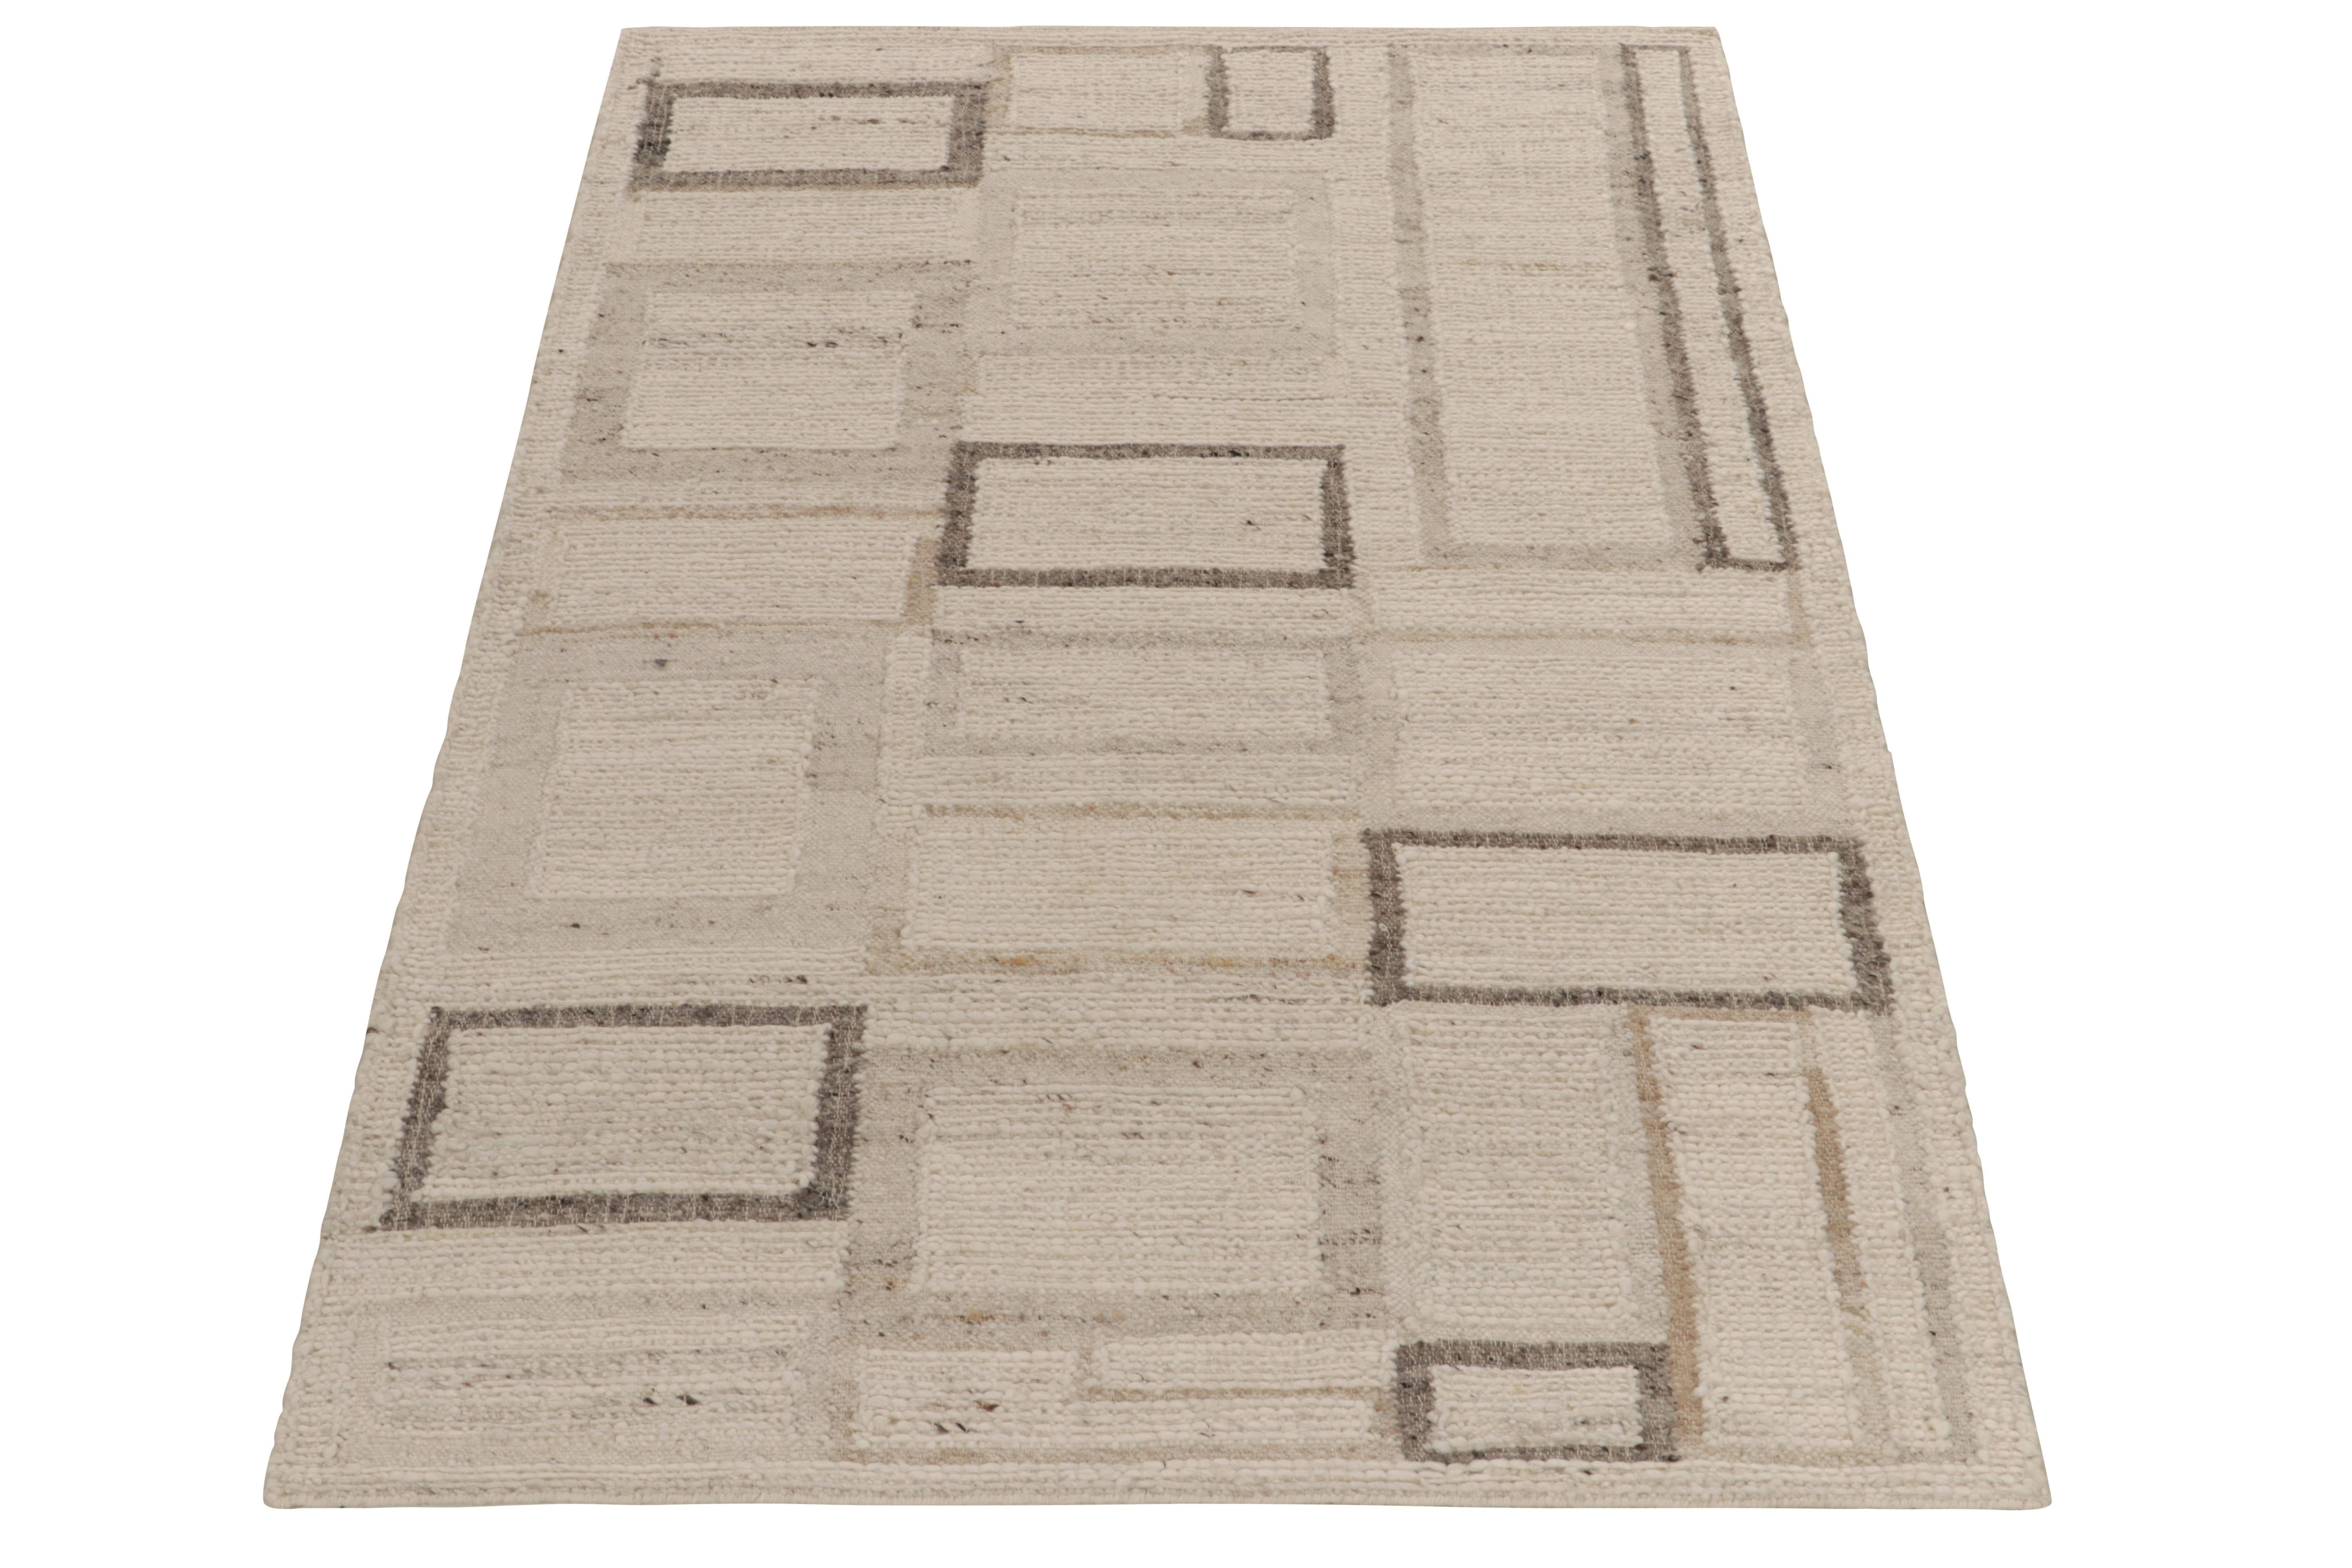 Rug & Kilim presents a bold contemporary take on Art Deco aesthetics with this 5x8 handspun Kilim. The flat weave rug features a modern geometric pattern in a comforting beige-brown colorway—the striations born of the handspinning technique enjoying